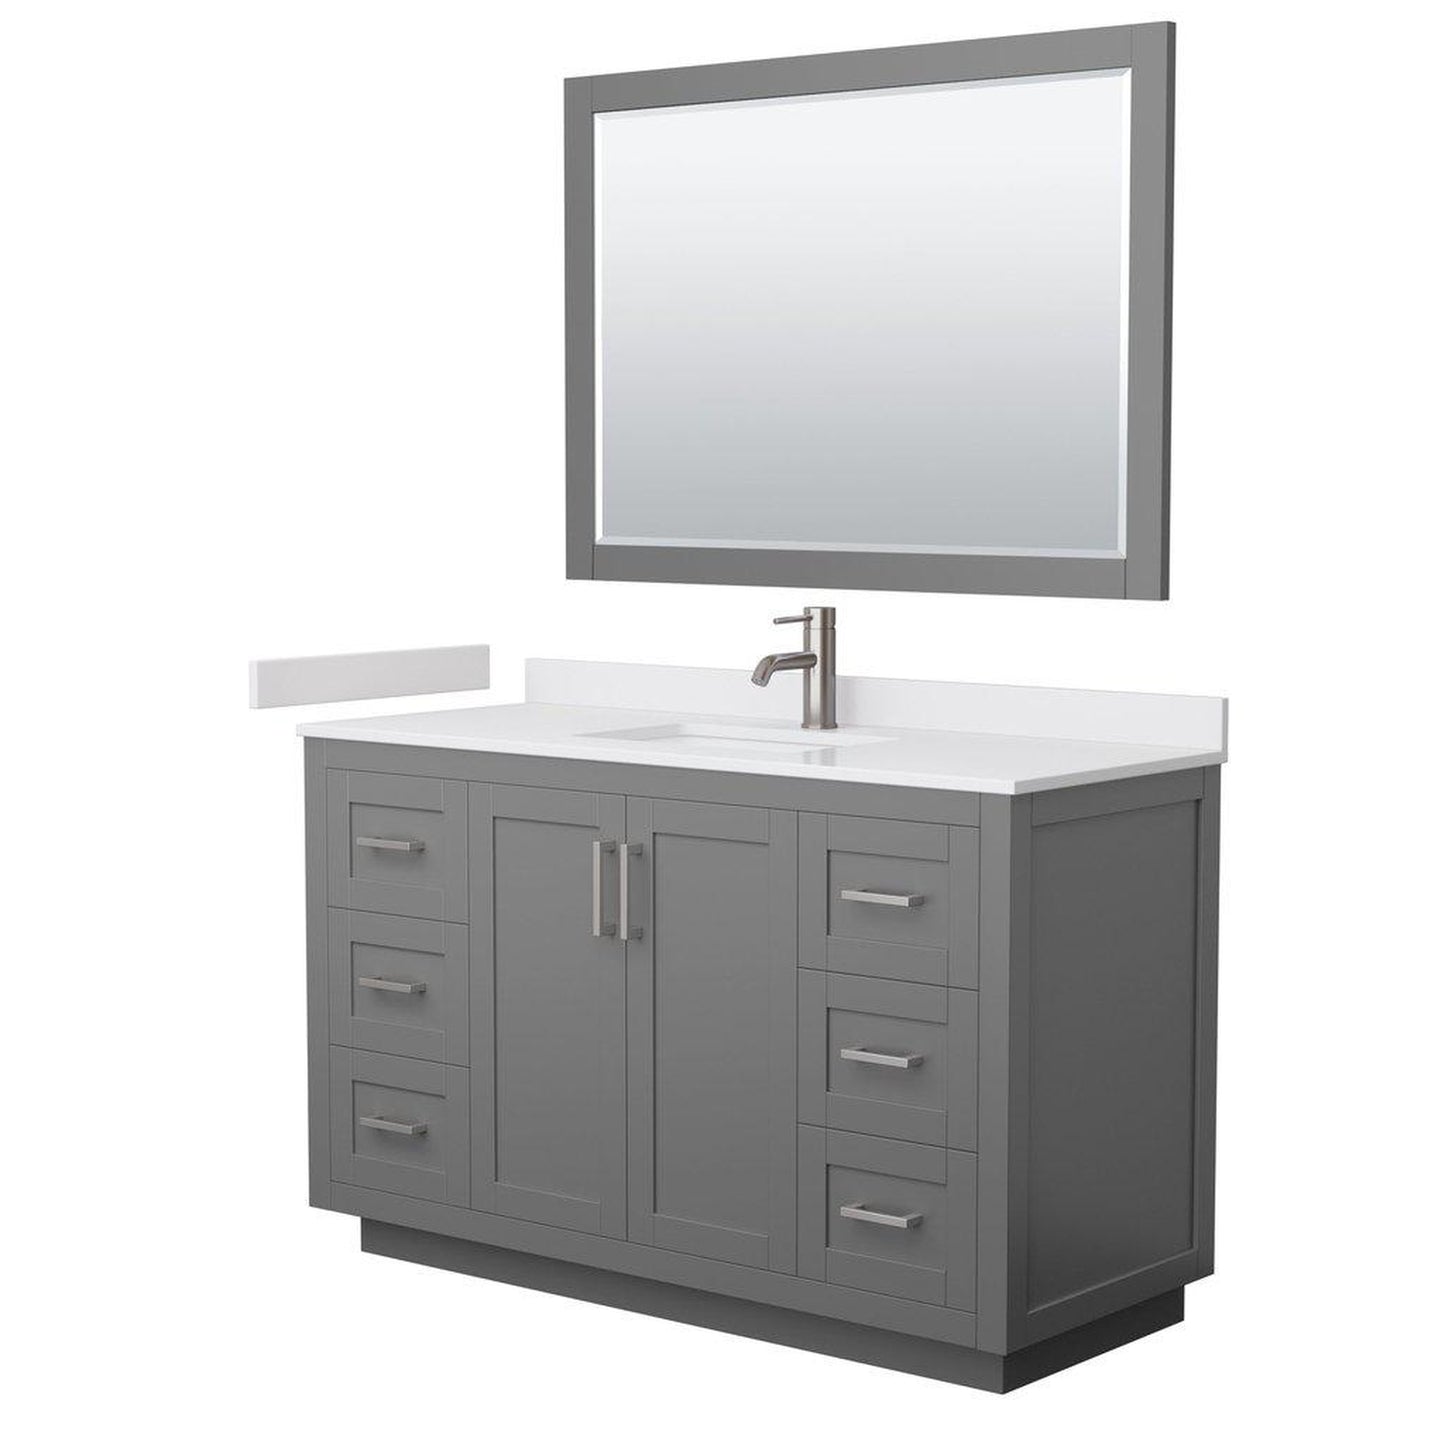 Wyndham Collection Miranda 54" Single Bathroom Dark Gray Vanity Set With White Cultured Marble Countertop, Undermount Square Sink, 46" Mirror And Brushed Nickel Trim